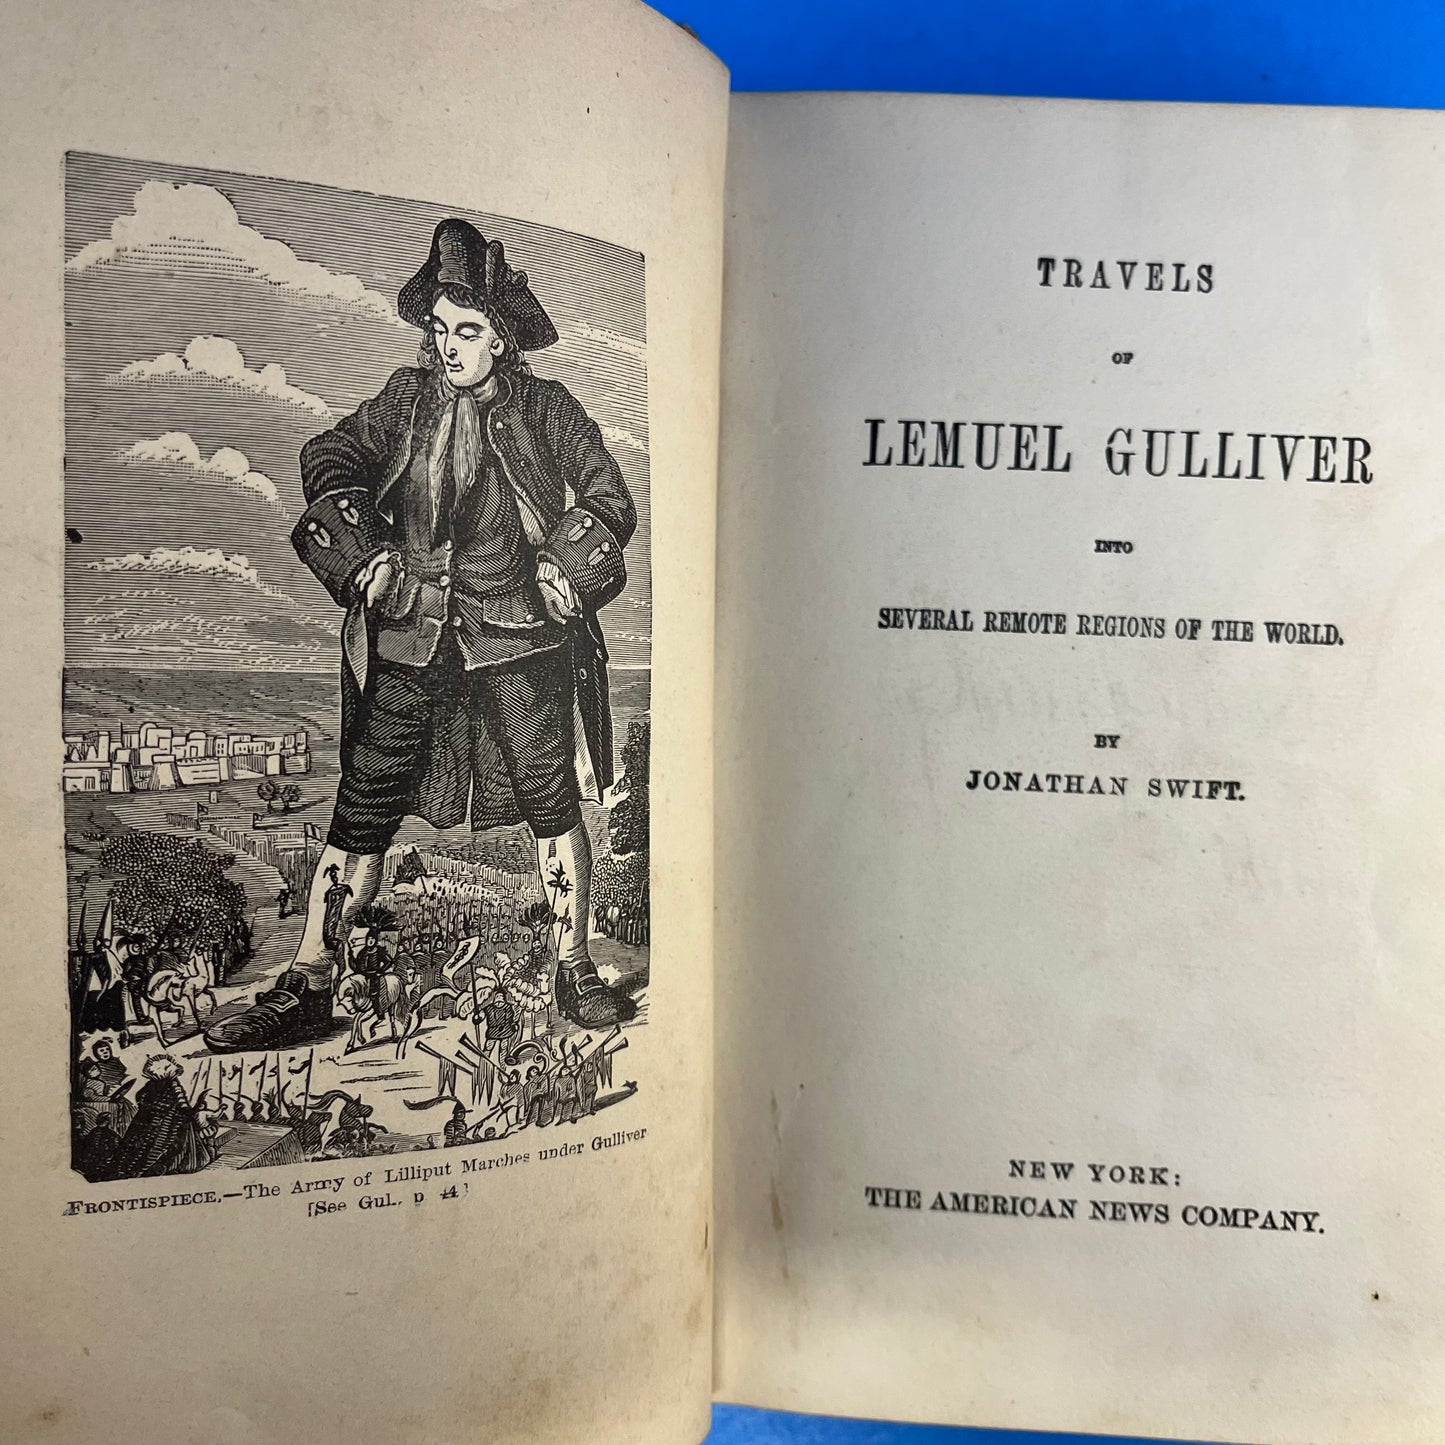 Travels of Lemuel Gulliver into Several Remote Regions of the World